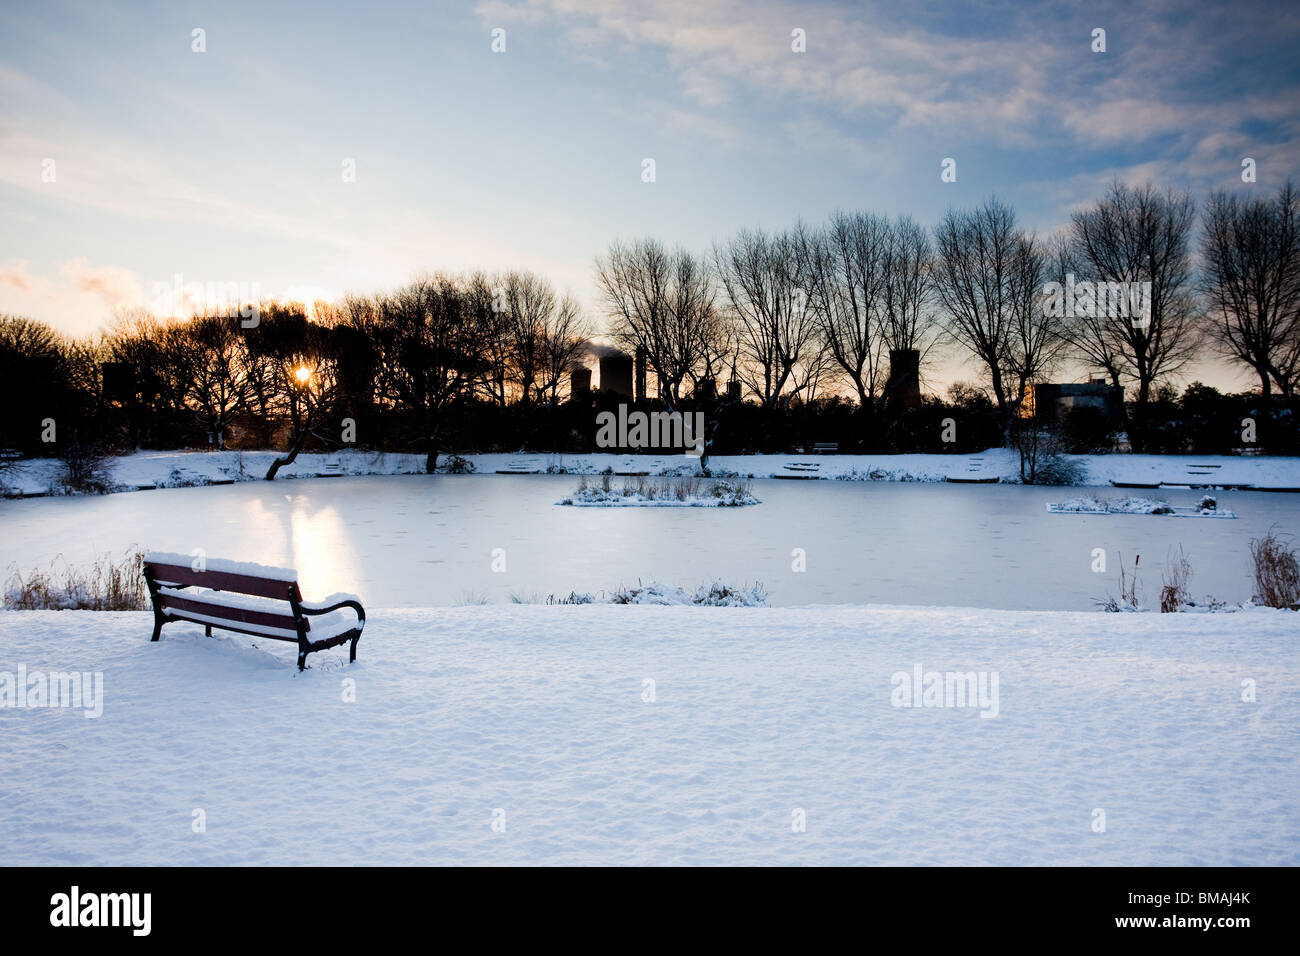 Deep Snow and Frozen Charlies Pond, Billingham, Cleveland, England Stock Photo